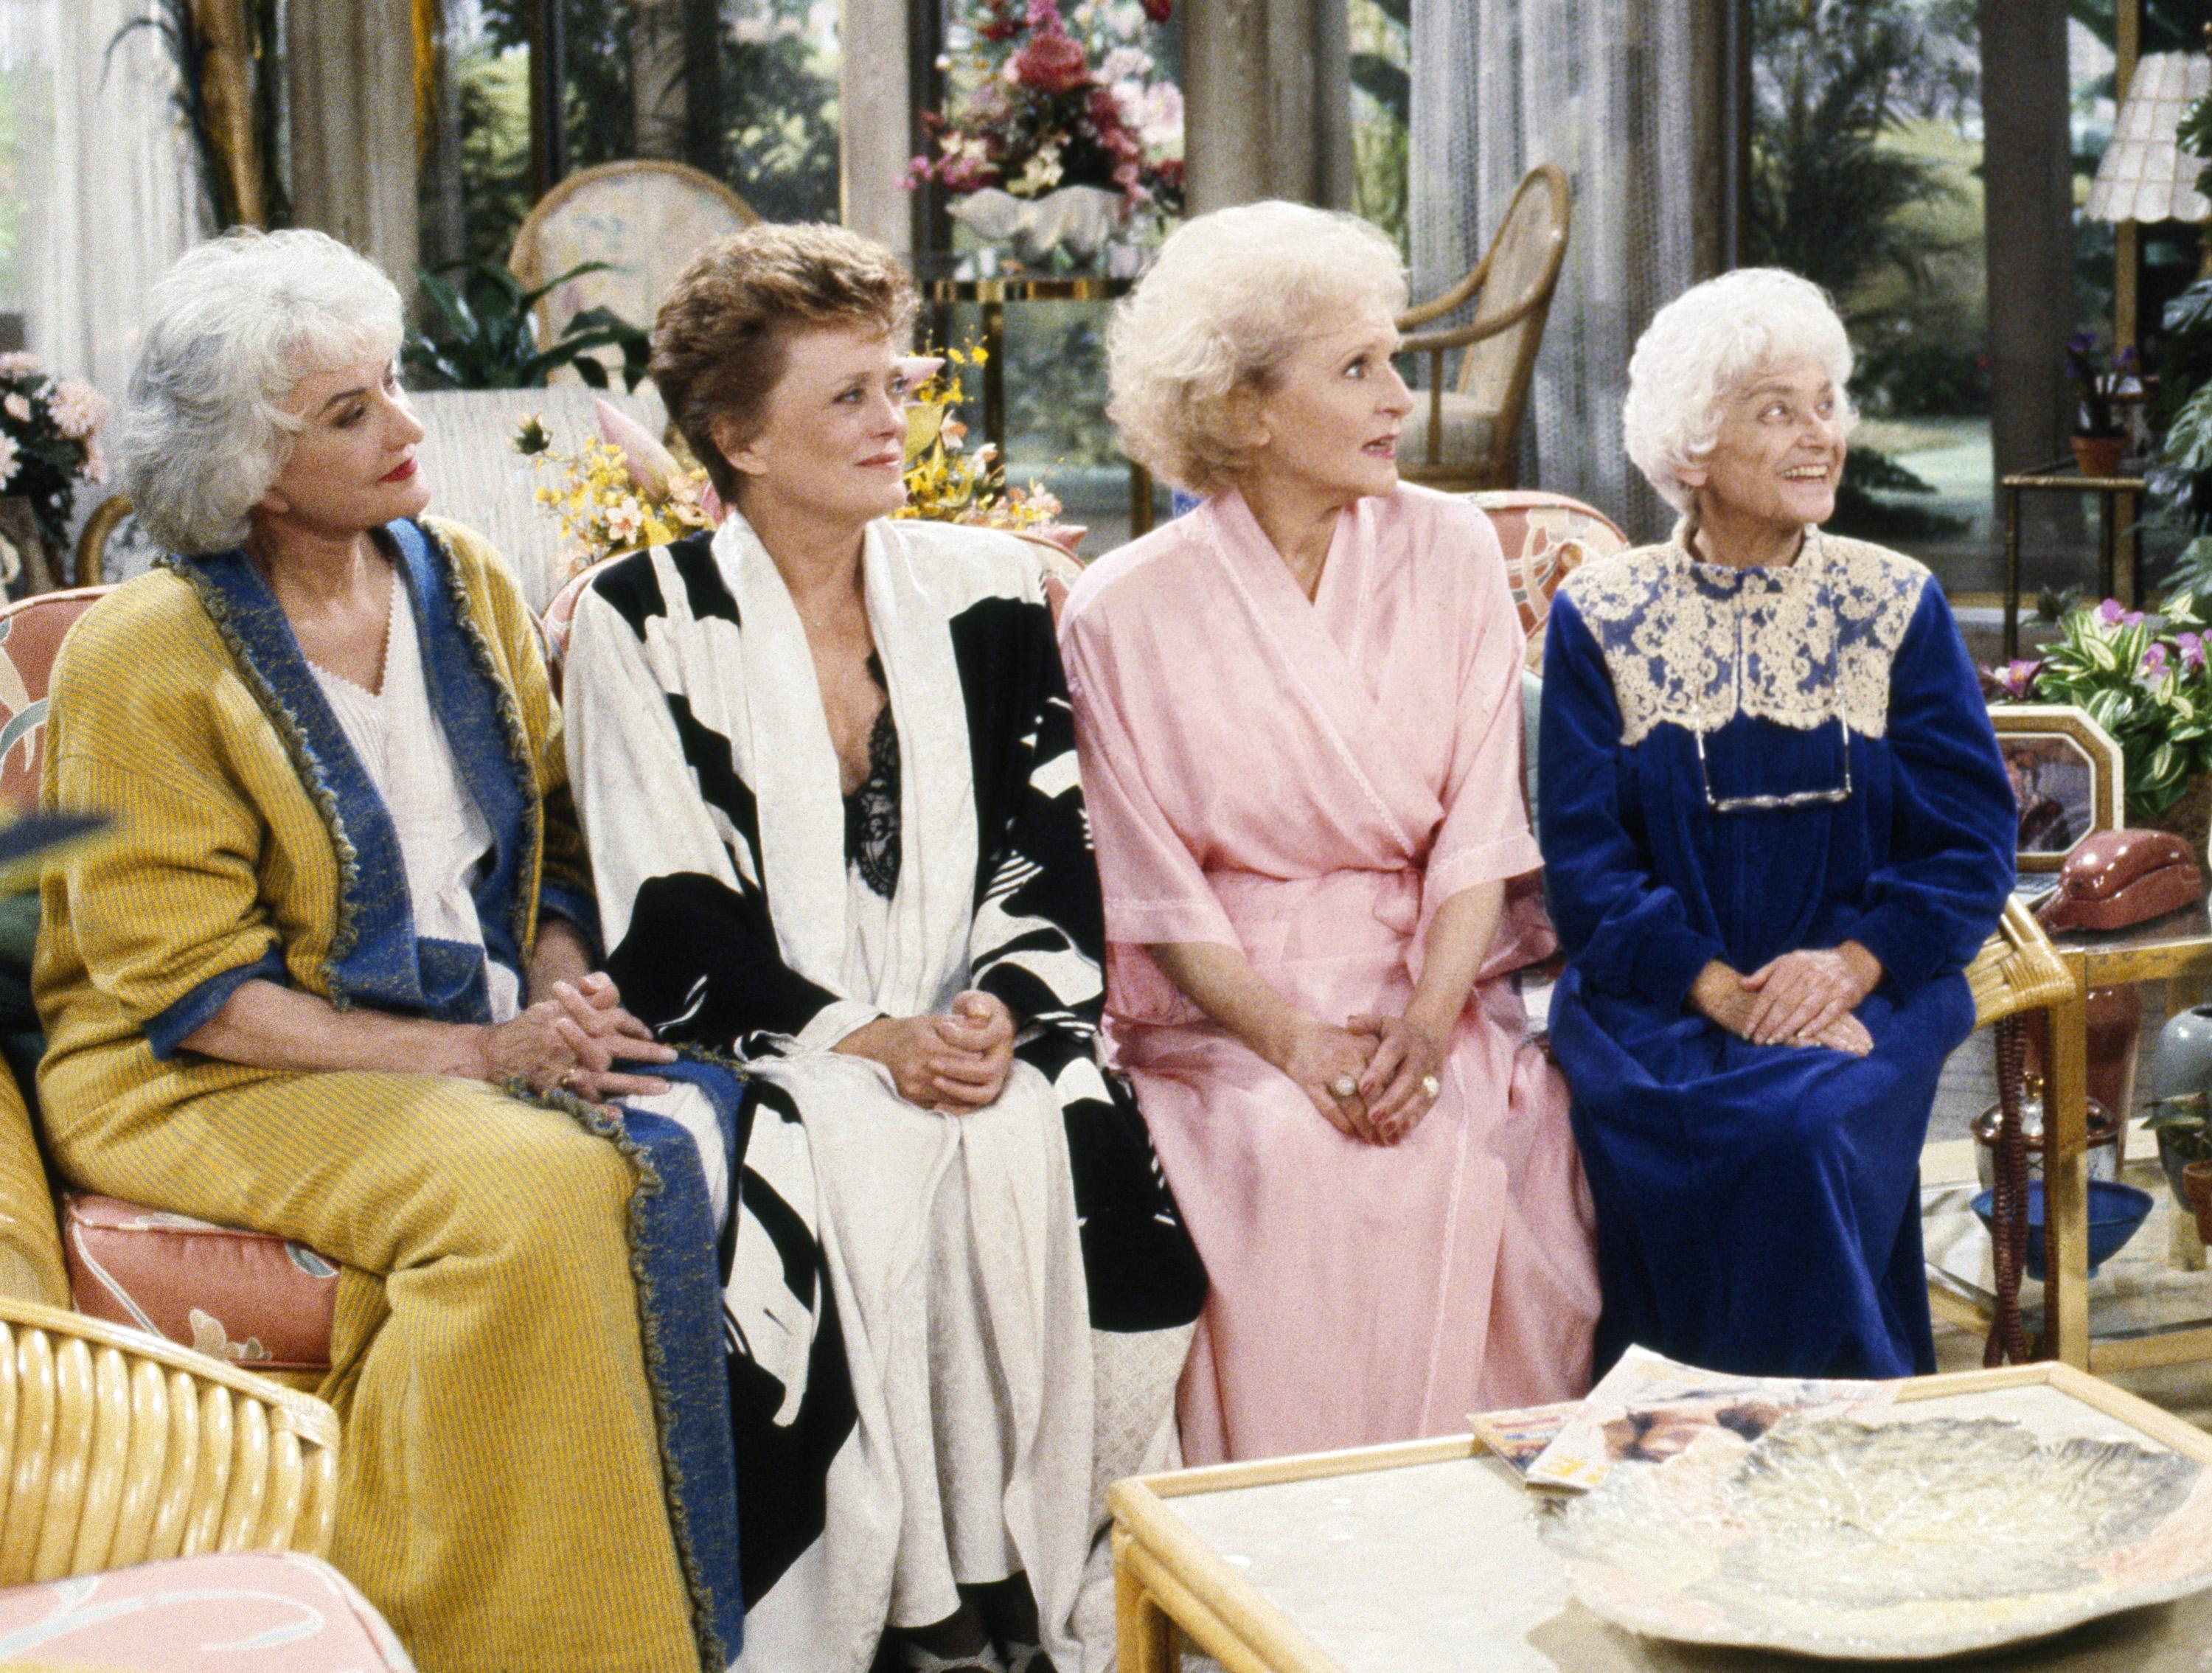 The Golden Girls cafe is finally open, banana wallpaper and all